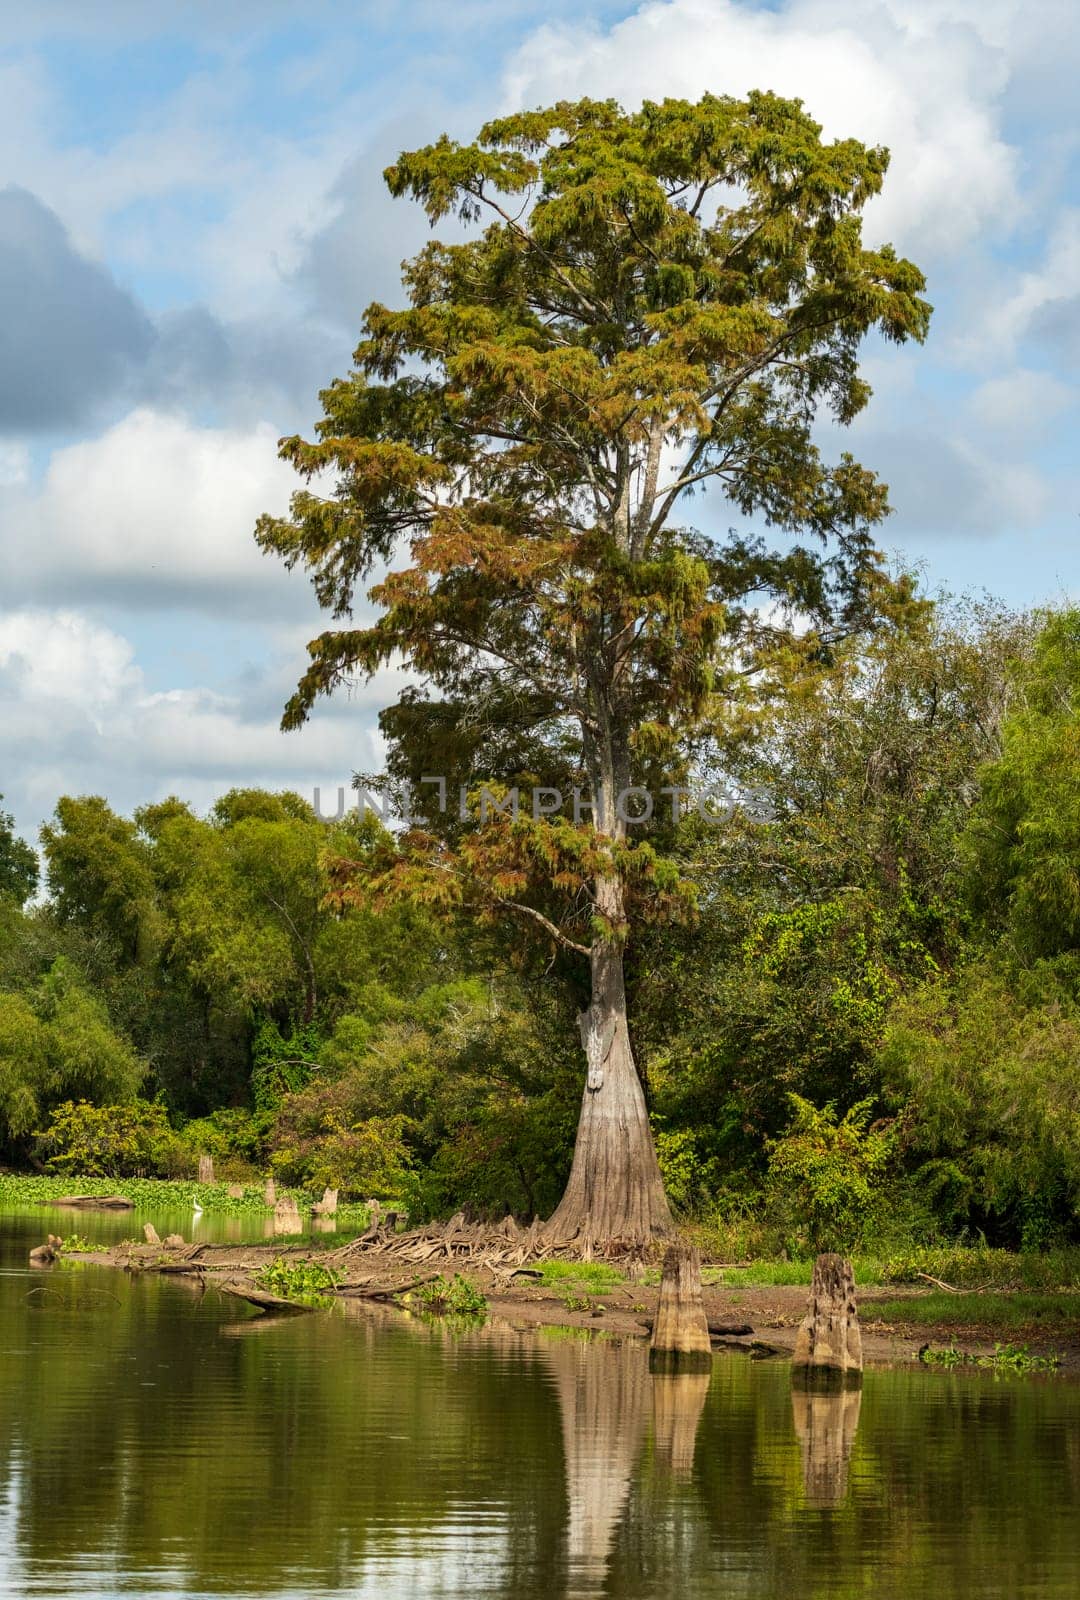 Large bald cypress trees rise out of water in Atchafalaya basin by steheap